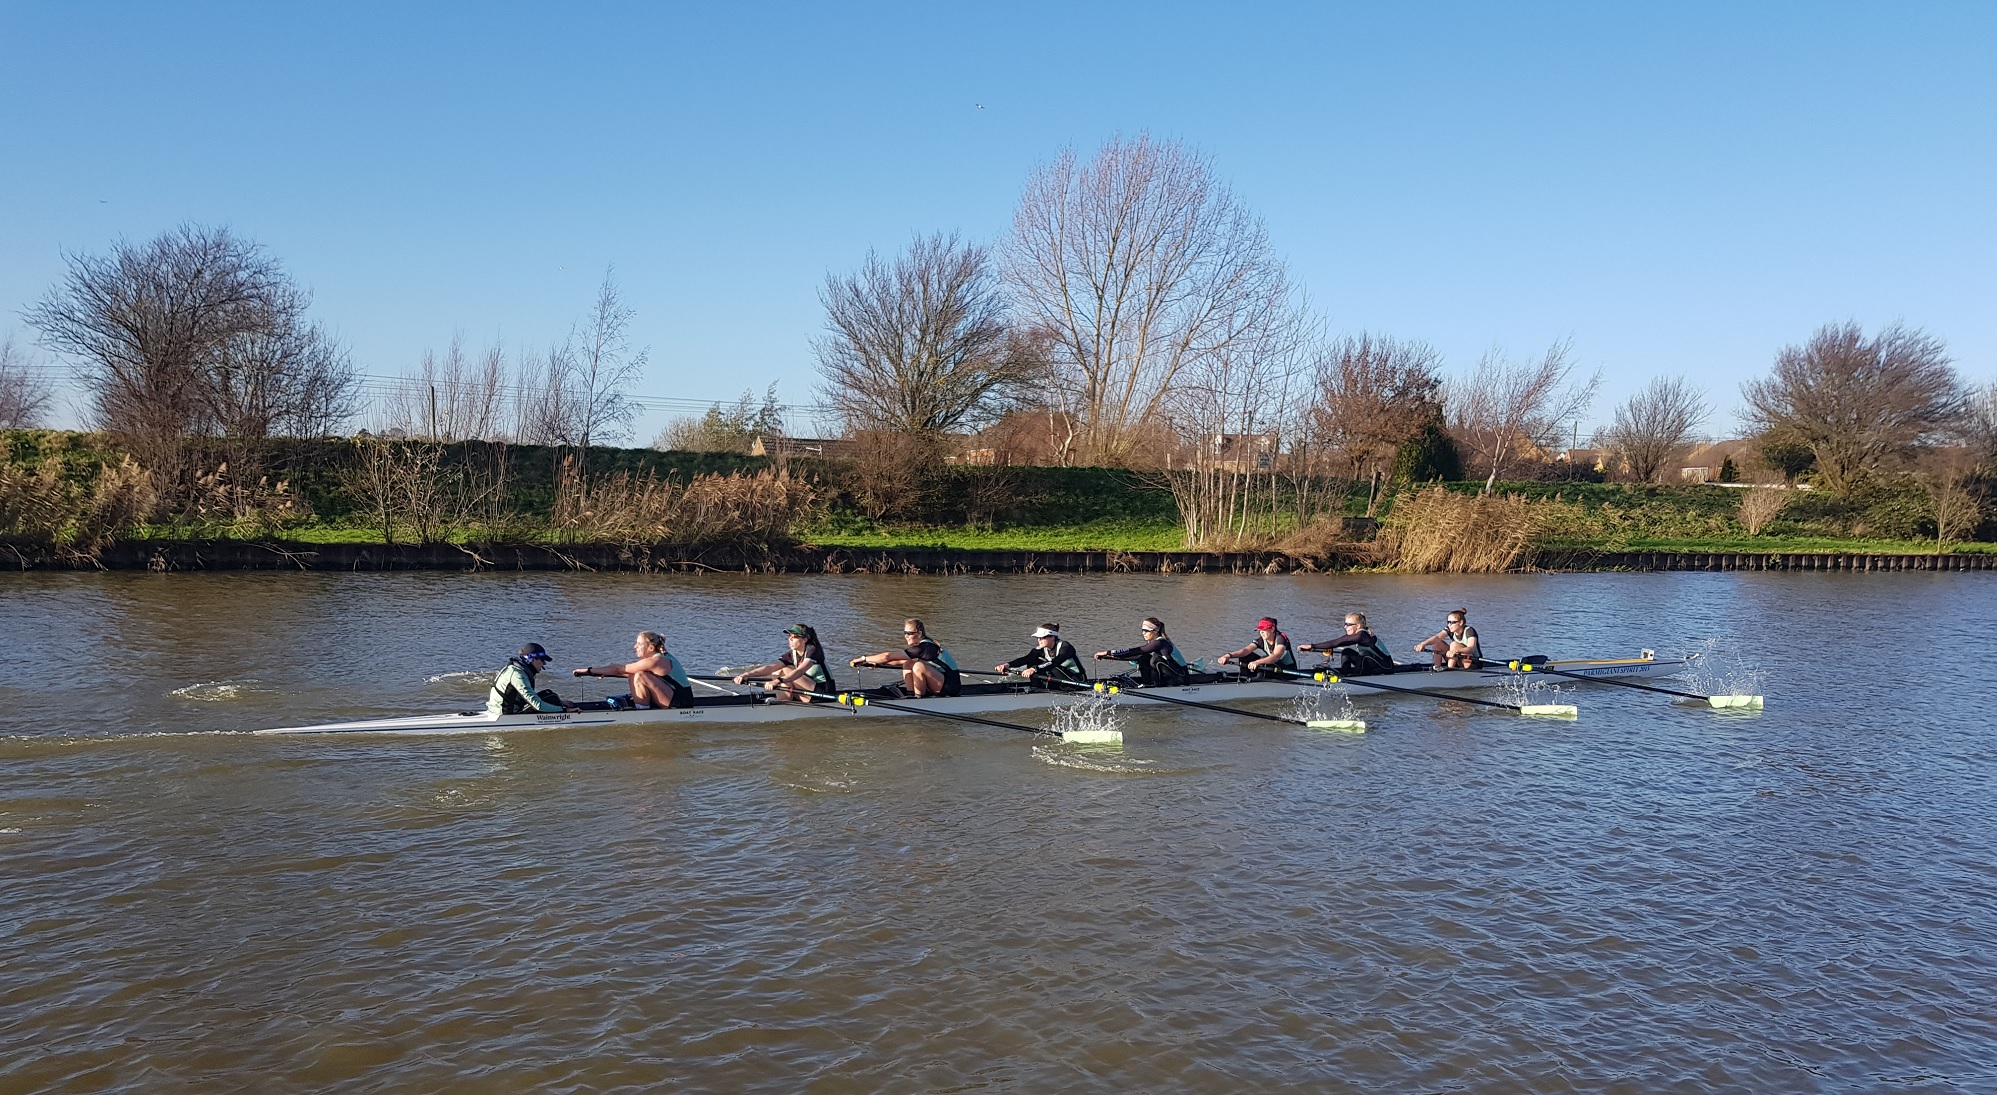 The Cambridge women's Blue boat on the water preparing for the Boat Race